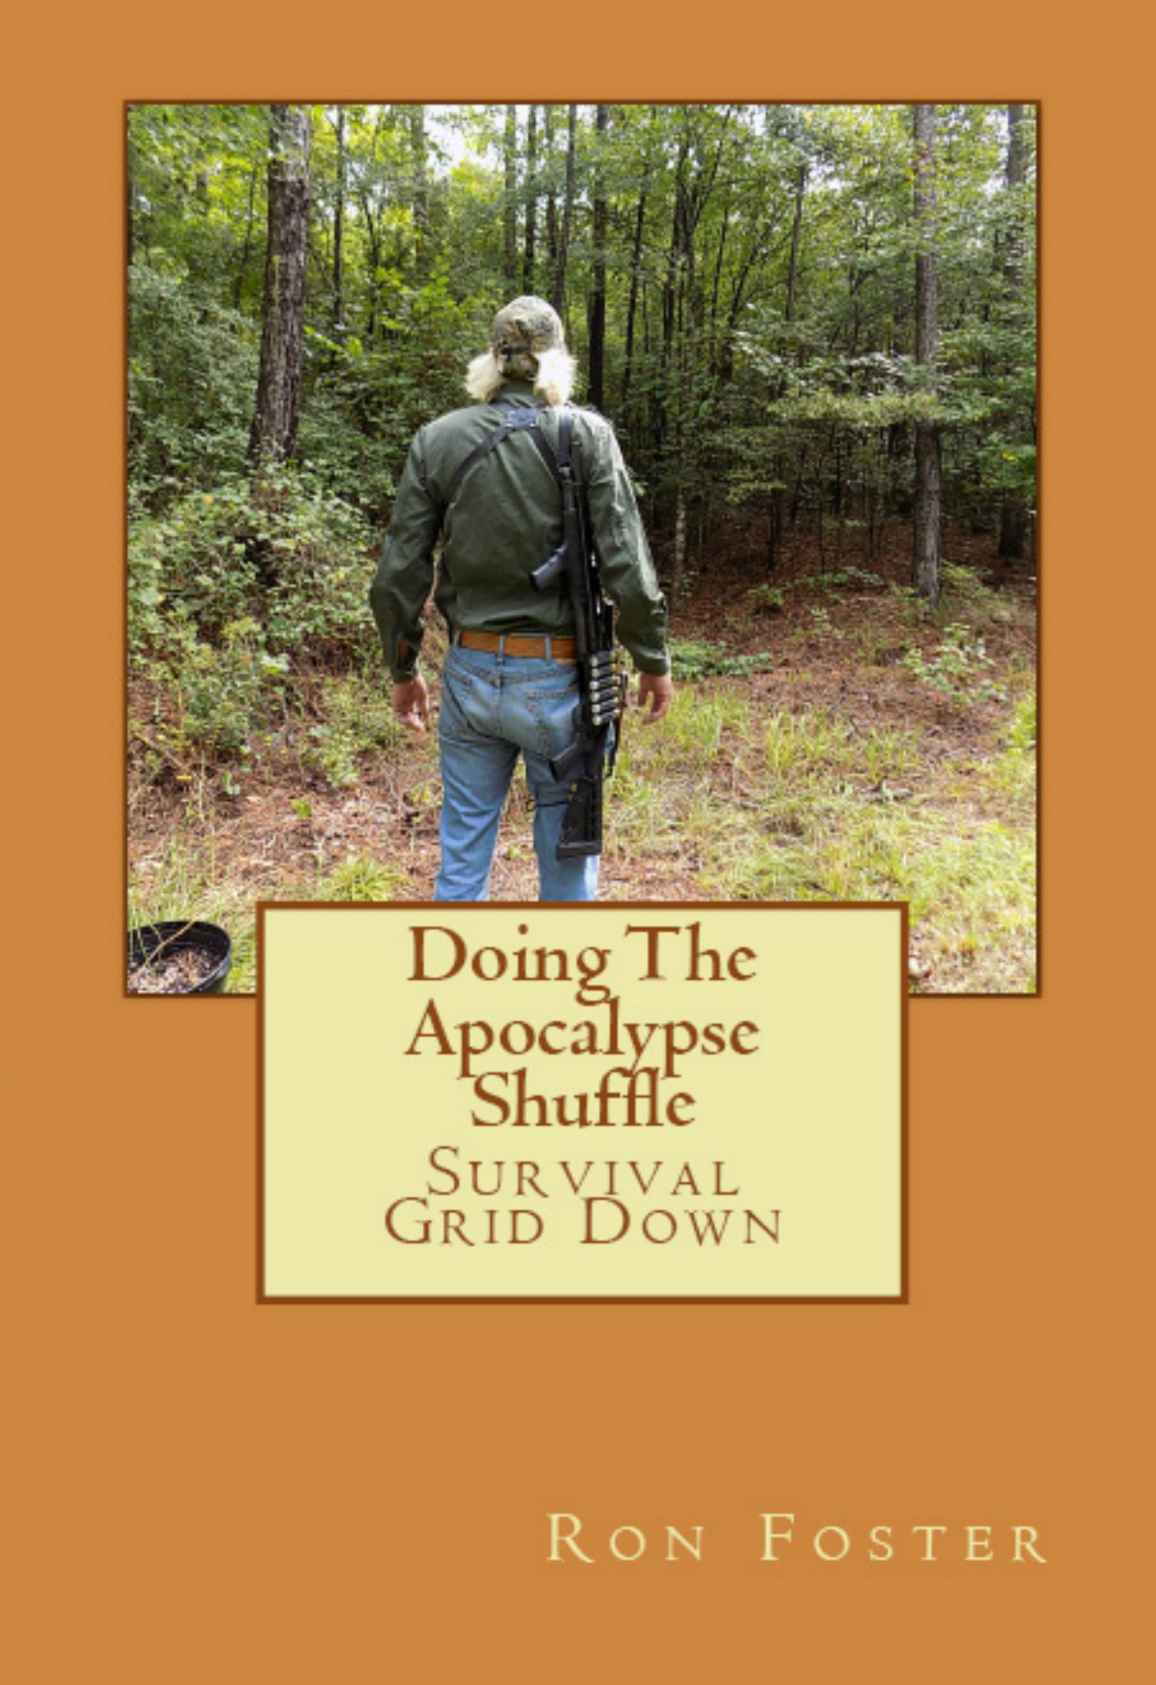 Doing The Apocalypse Shuffle: Southern Prepper Adventure Fiction of Survival Grid Down (Old Preppers Die Hard Book 2) by Ron Foster